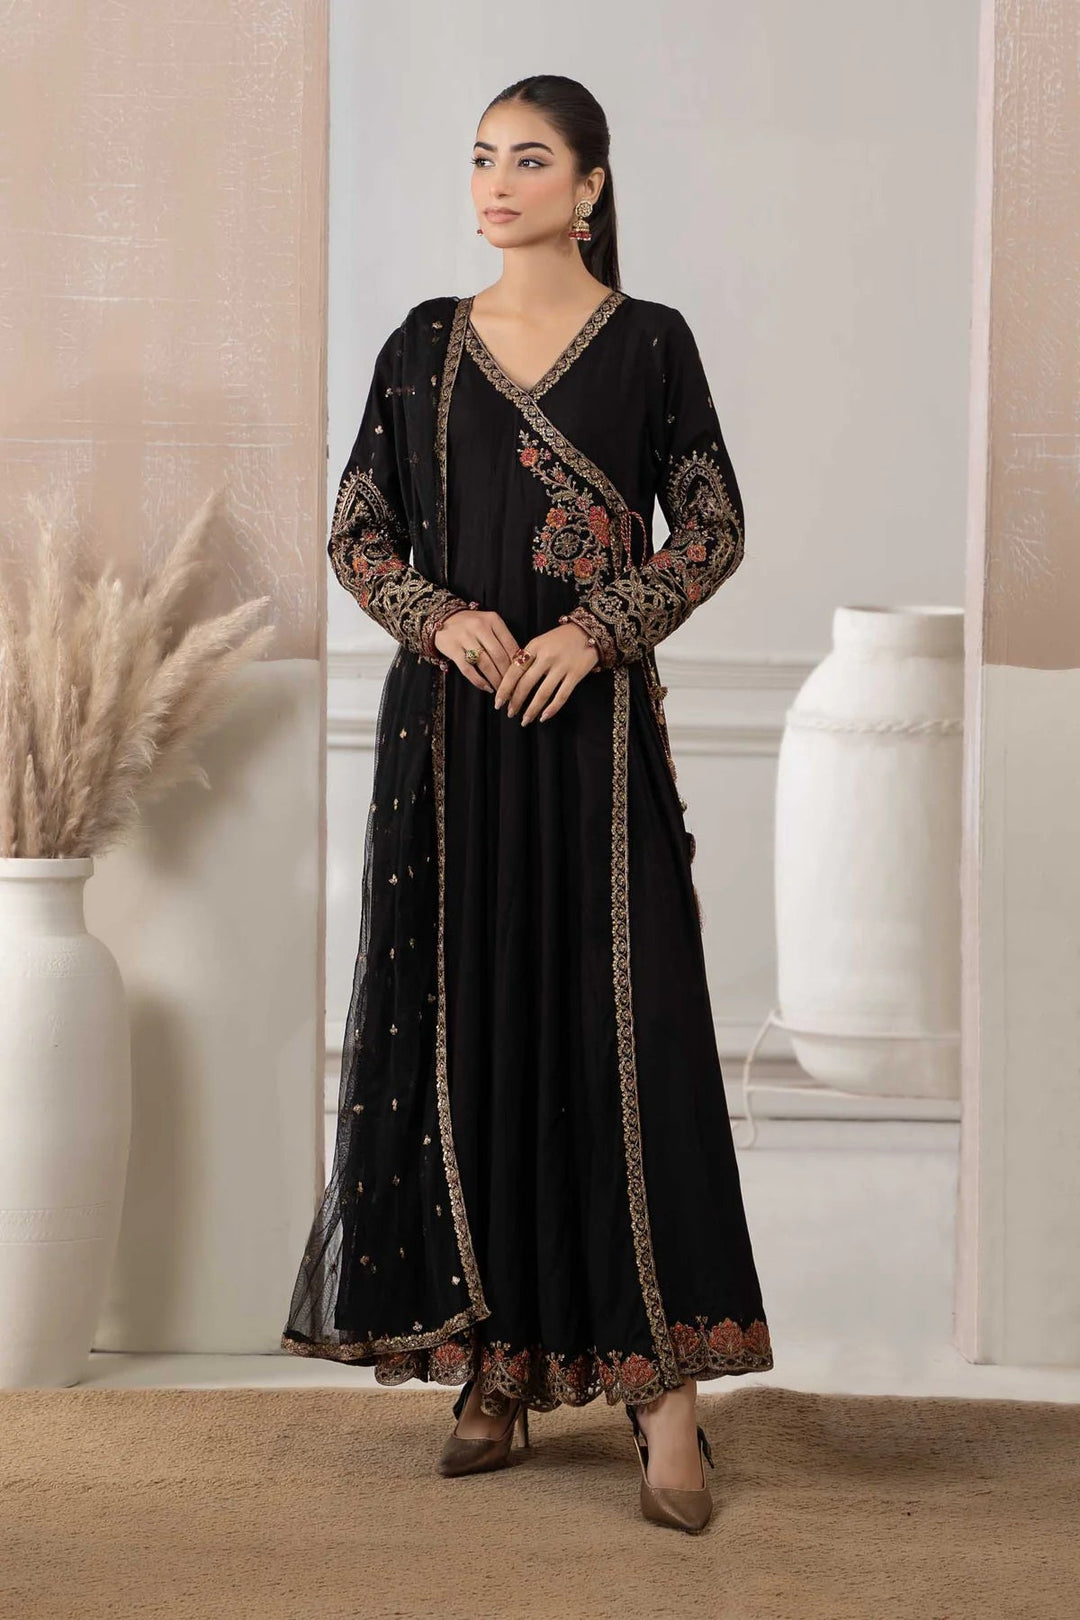 US Based Brands Outlet Pakistani Clothing Store and Online Sale ...